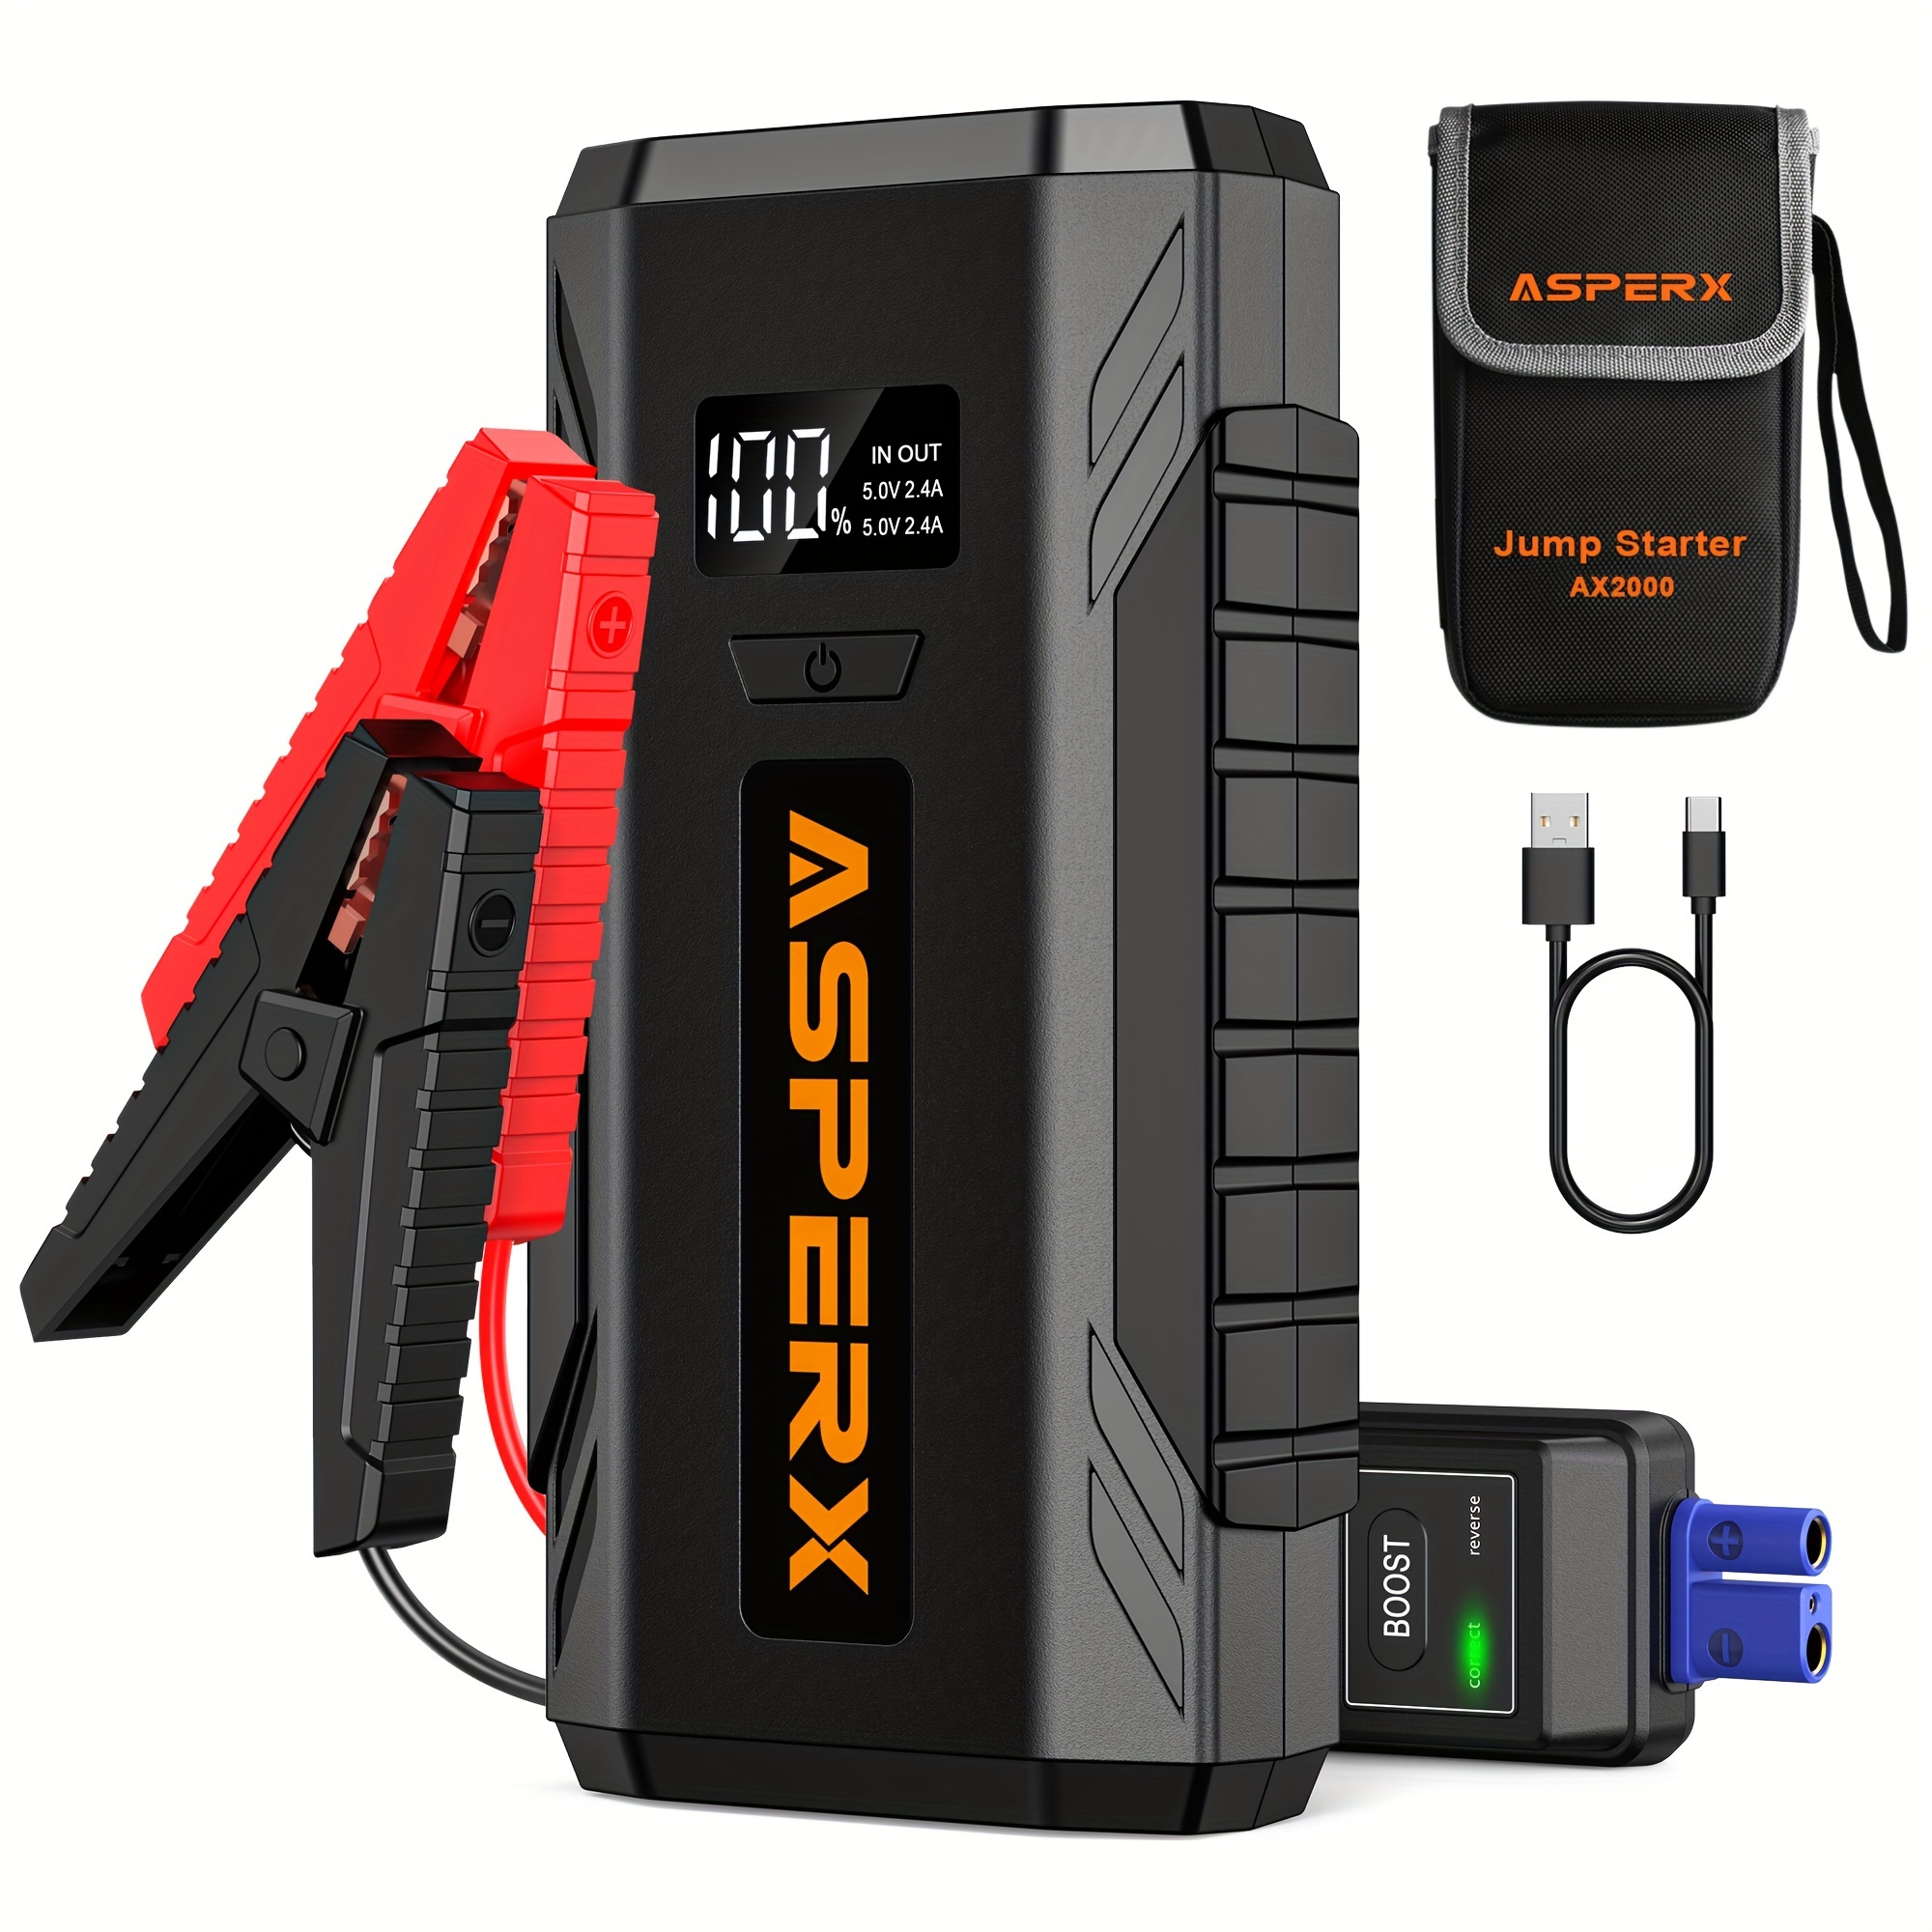 

Asperx Jump Starter, 2000a Car Battery Jump Starter For Up To 8.0l Gas Or 6.5l Engine, 12v Portable Car Jump Starter, Jump Box With 1.4 Inch Lcd Display